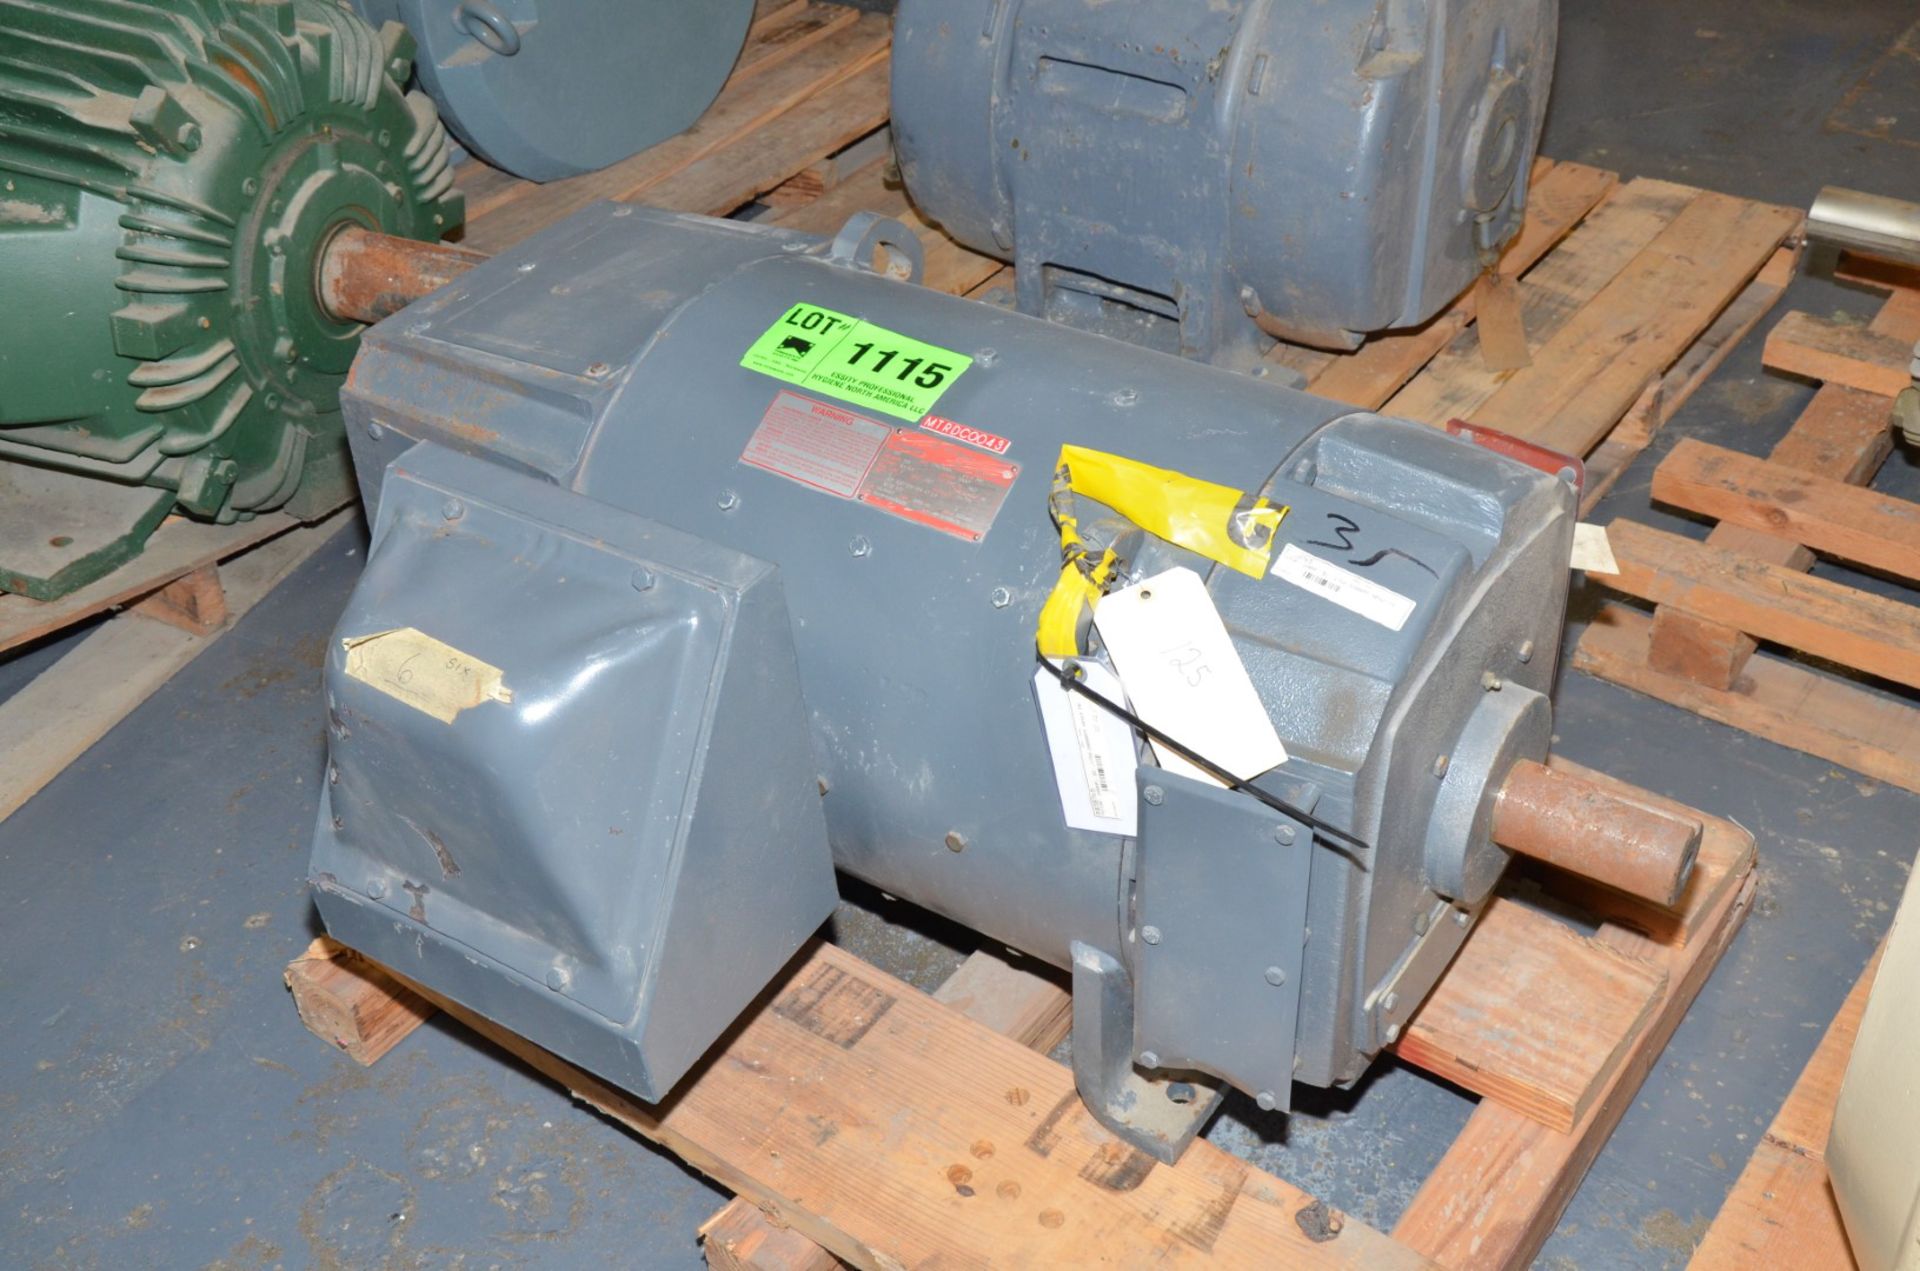 GE 200 HP 500V 2000 RPM ELECTRIC MOTOR [RIGGING FEE FOR LOT #1115 - $25 USD PLUS APPLICABLE TAXES] - Image 2 of 3